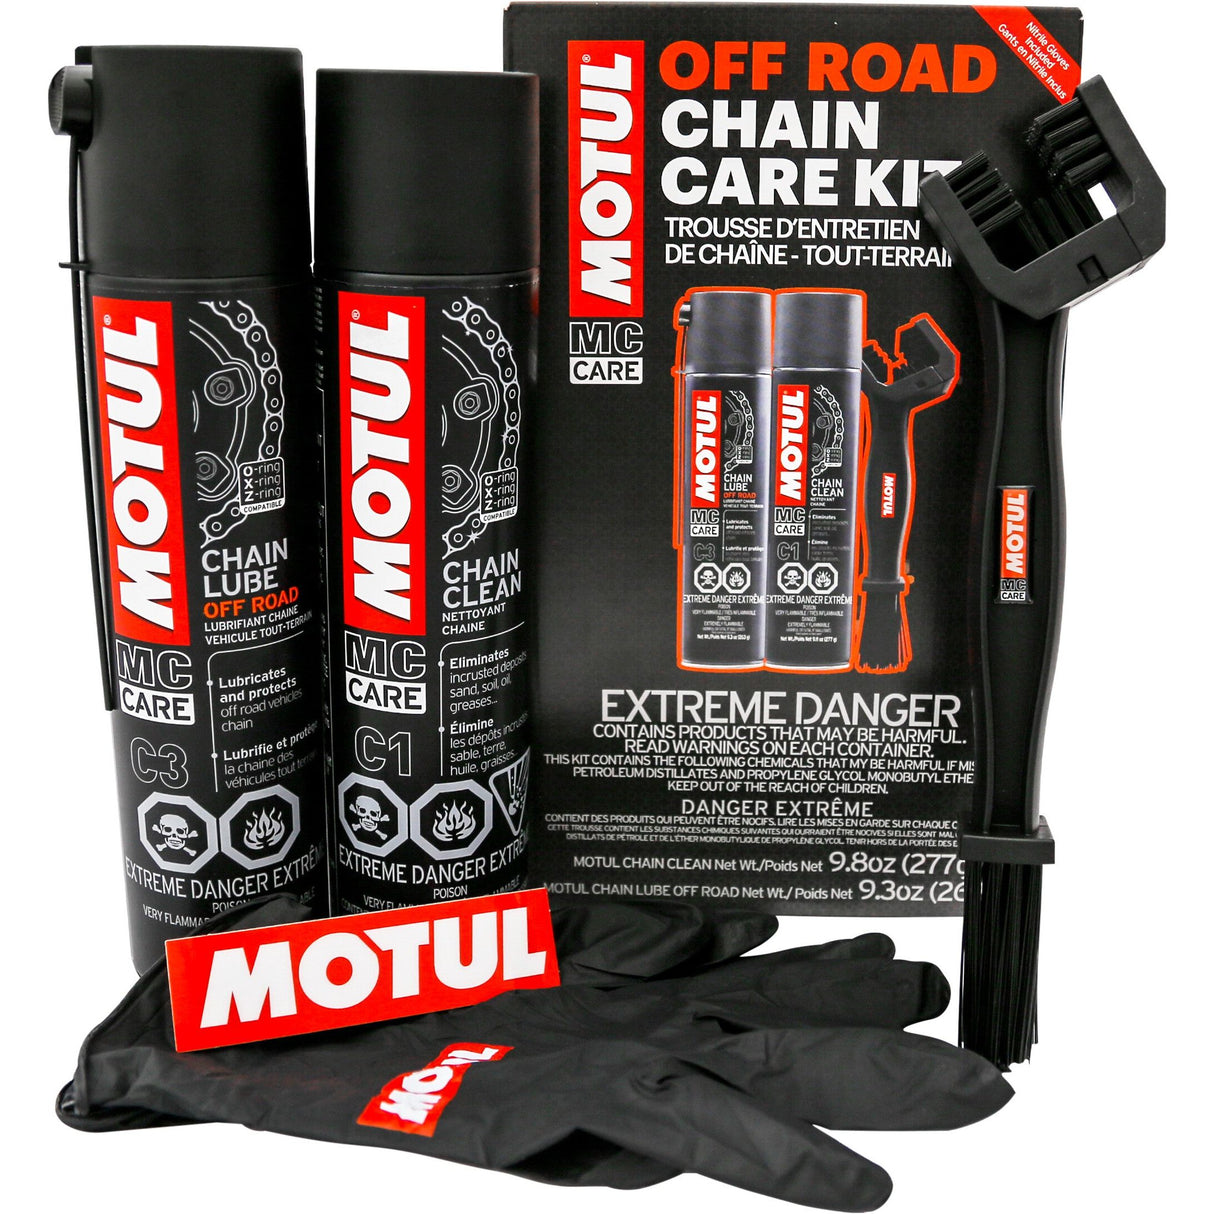 CHAIN CARE KIT OFF-ROAD